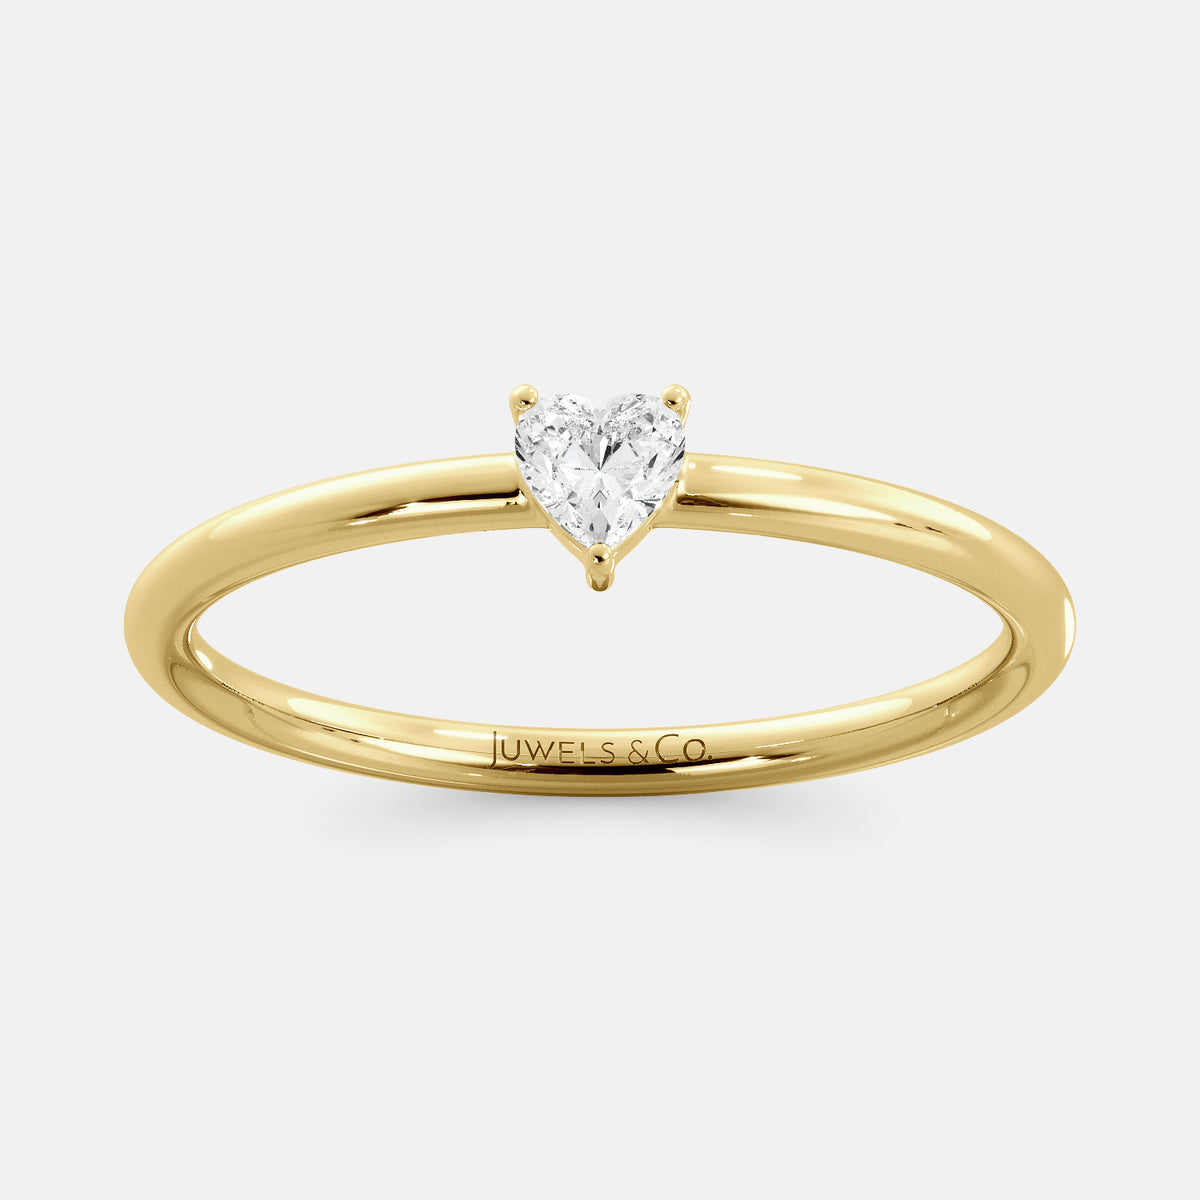 14K Yellow Gold 1/3ct Diamond Heart Ring Size 6.5 - Colonial Trading Company